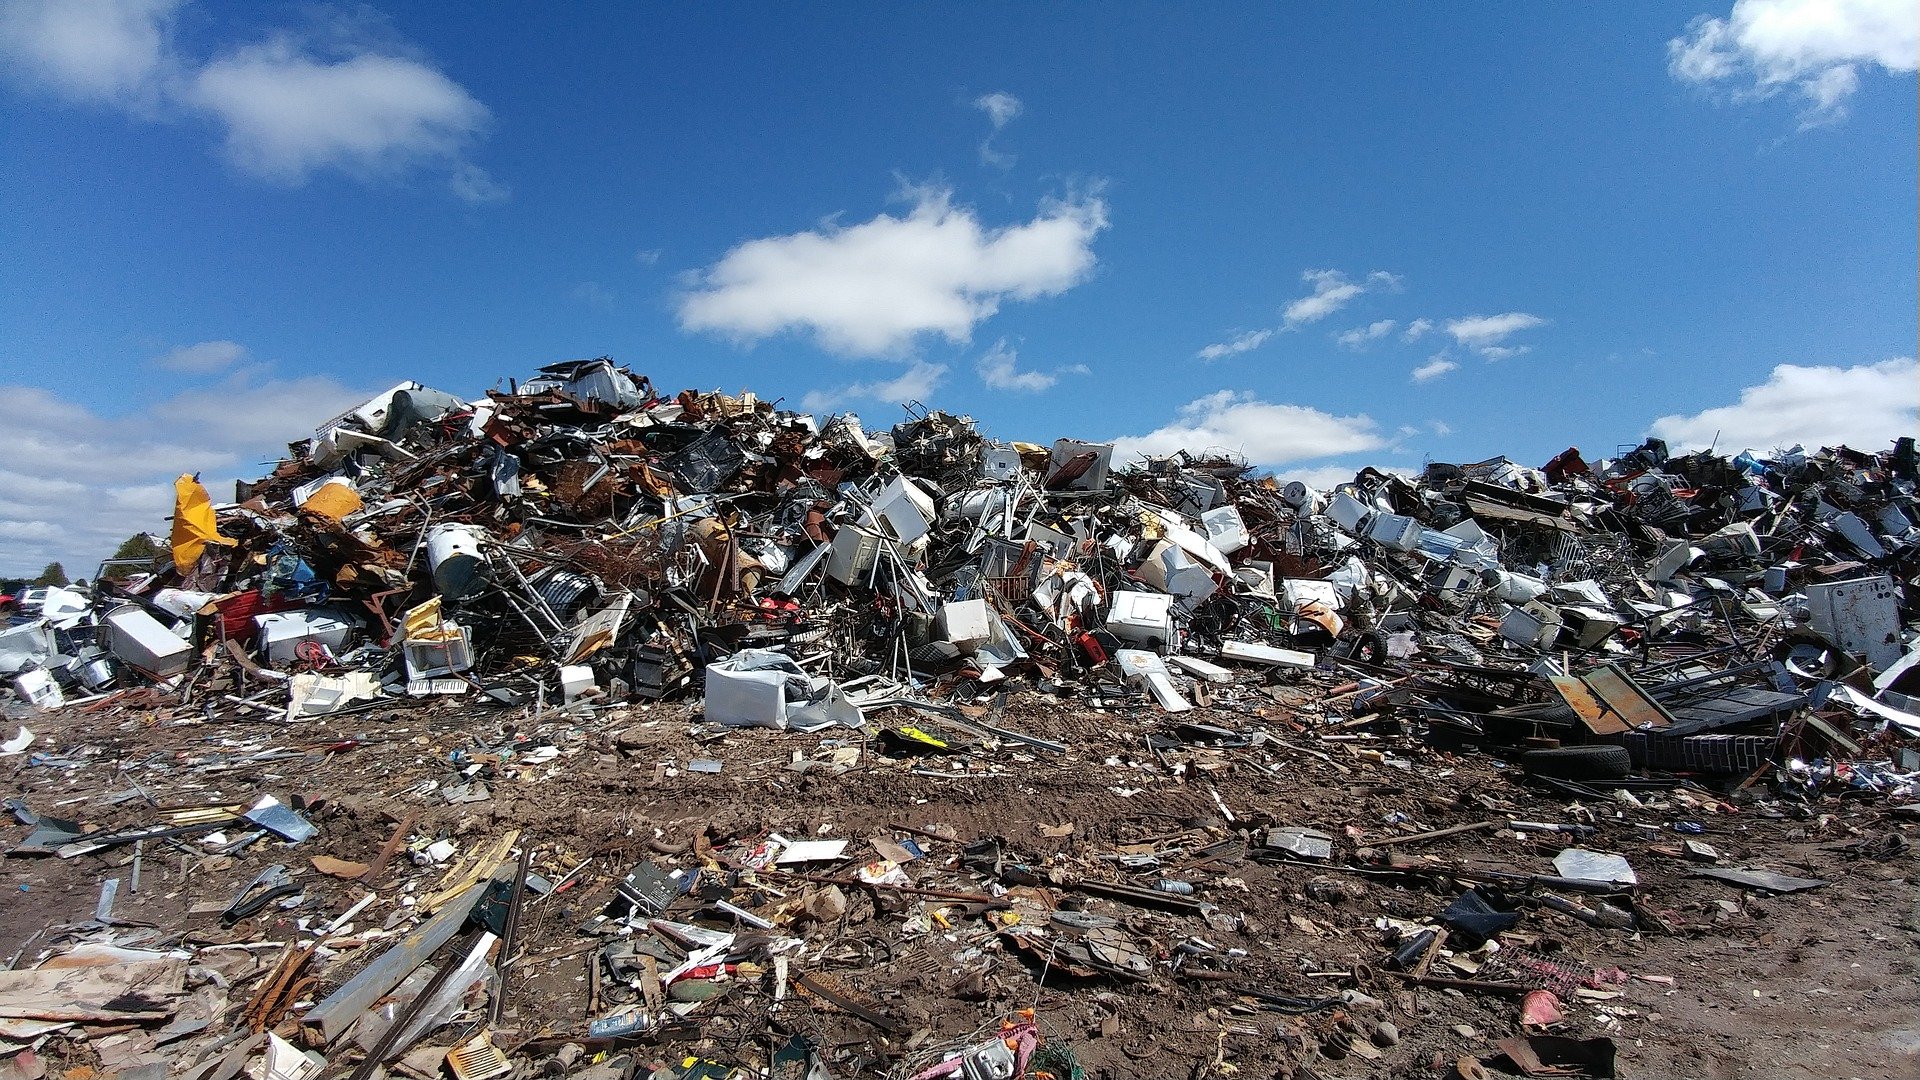 Photograph of a scrap yard by vkingxl from Pixabay